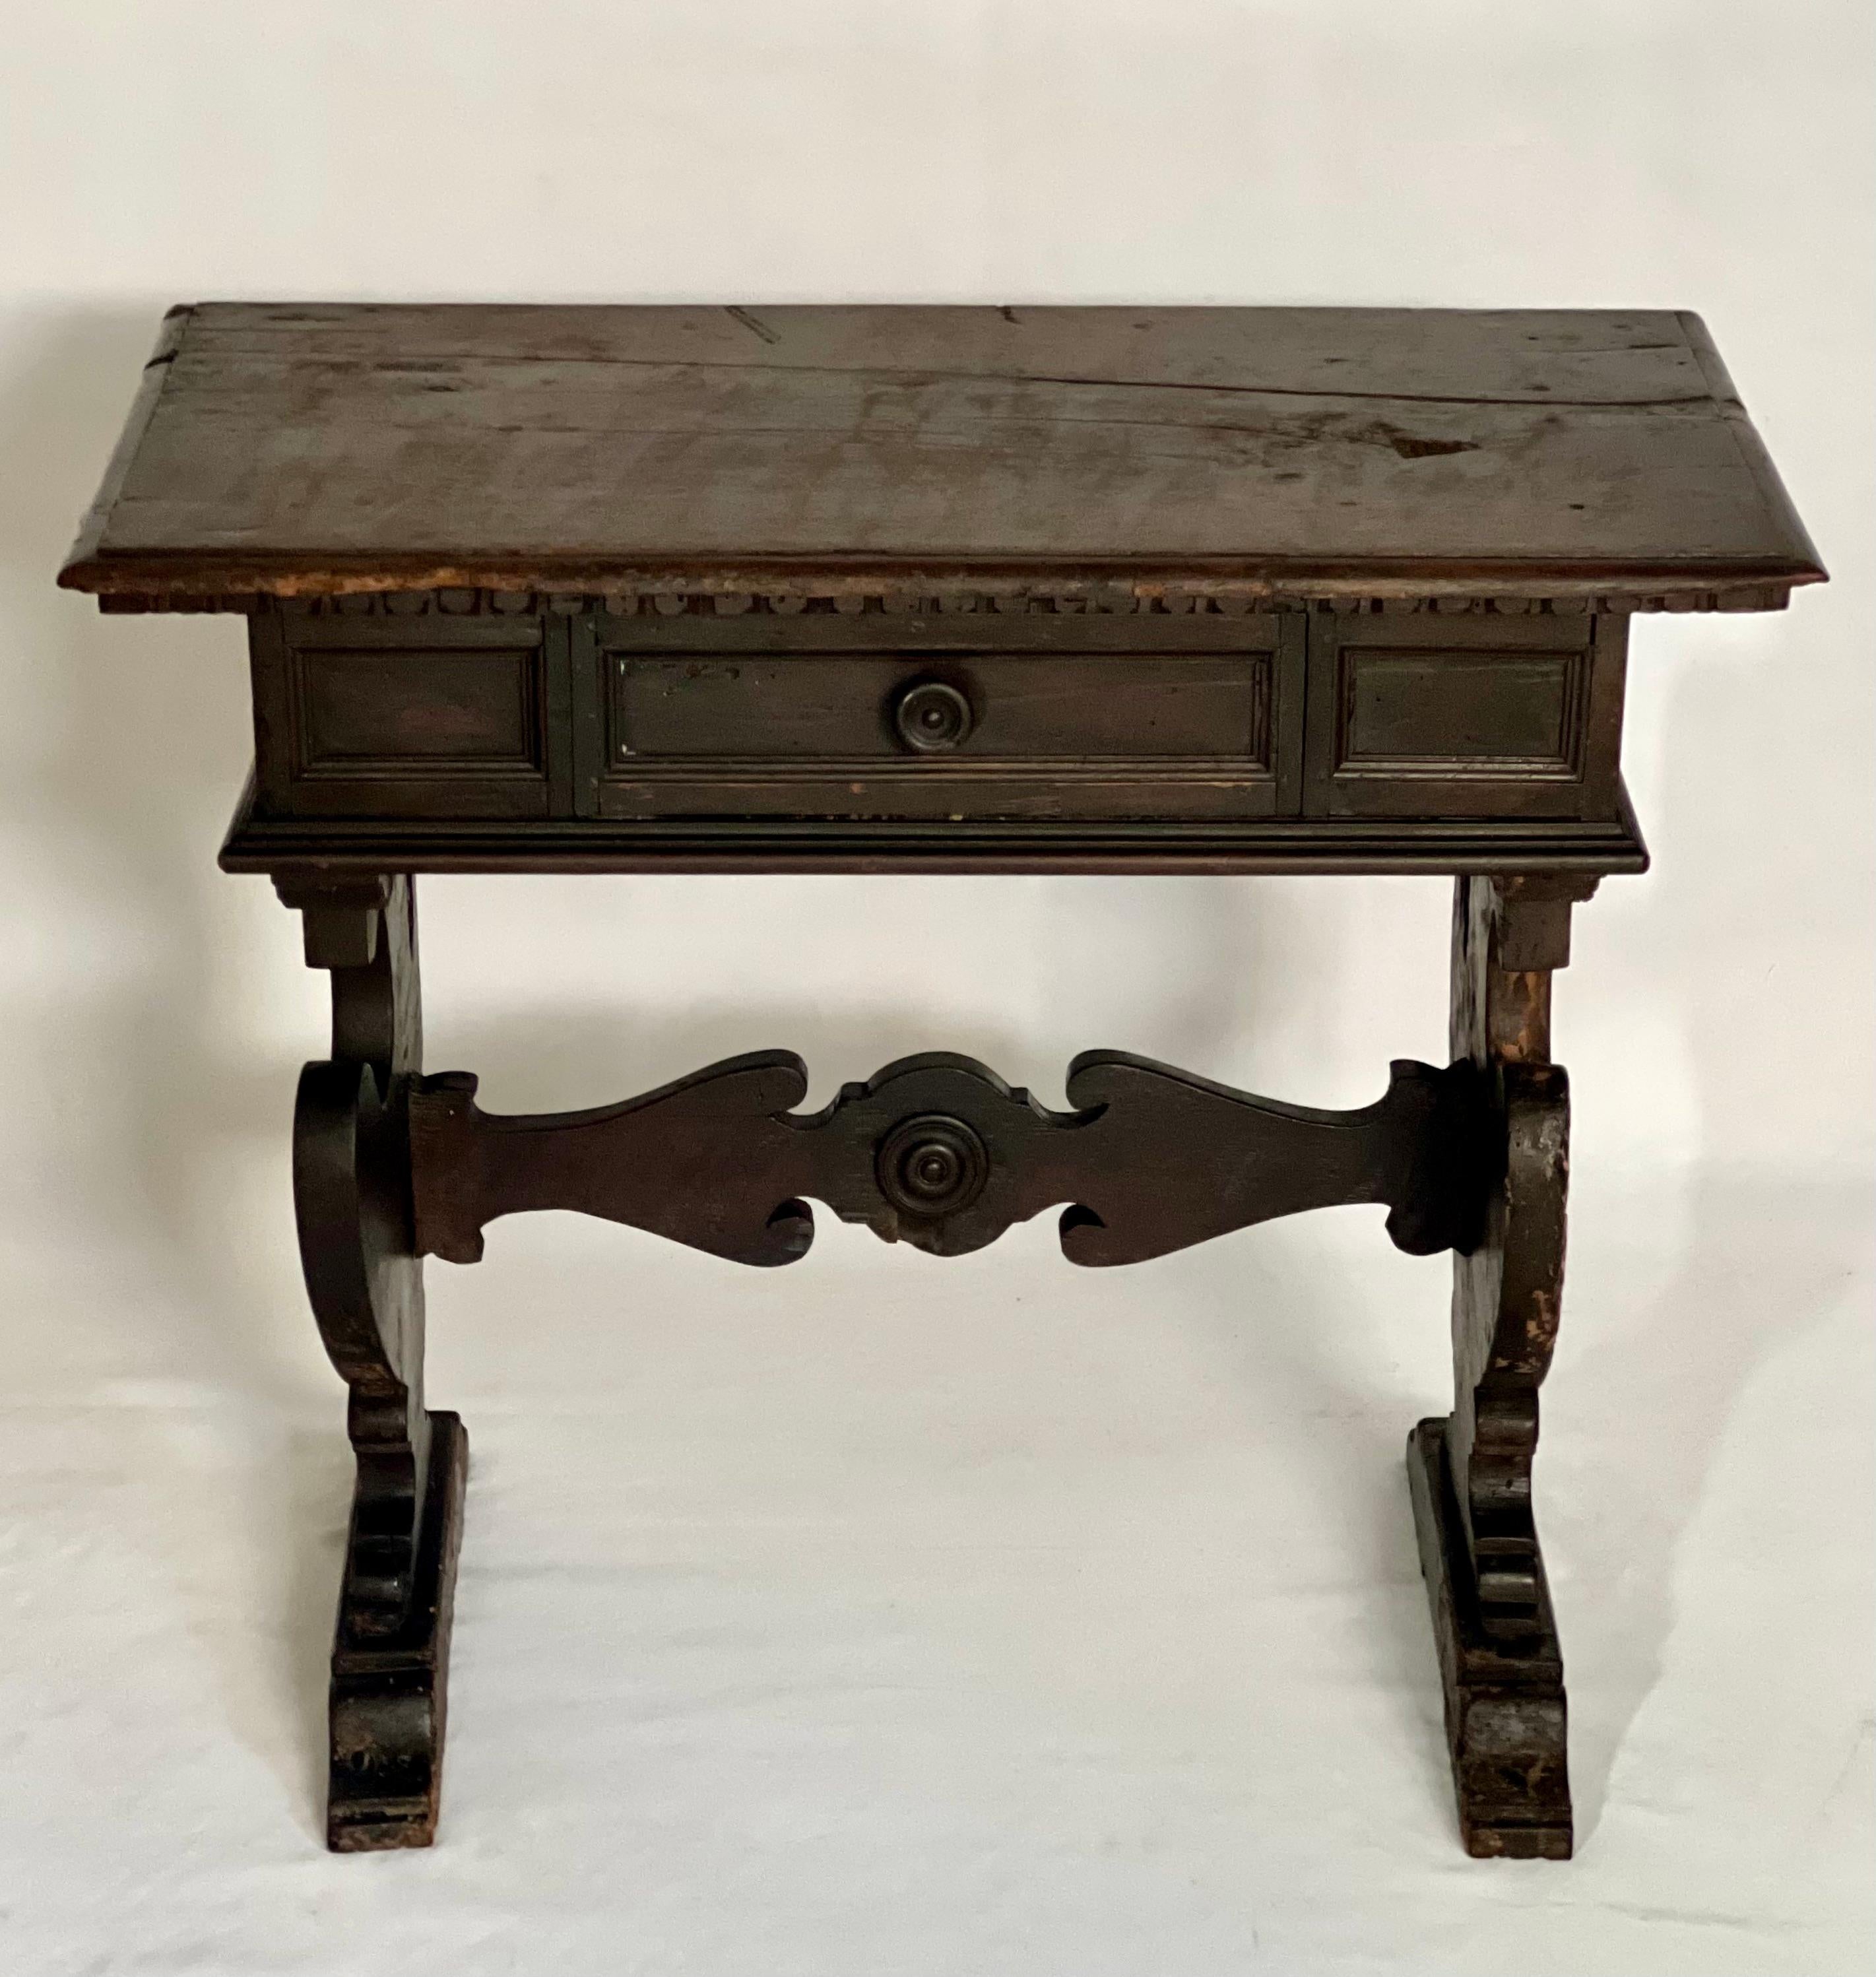 Renaissance Revival Early 19th Century Italian Renaissance Carved Oak Trestle Base Table with Patina For Sale